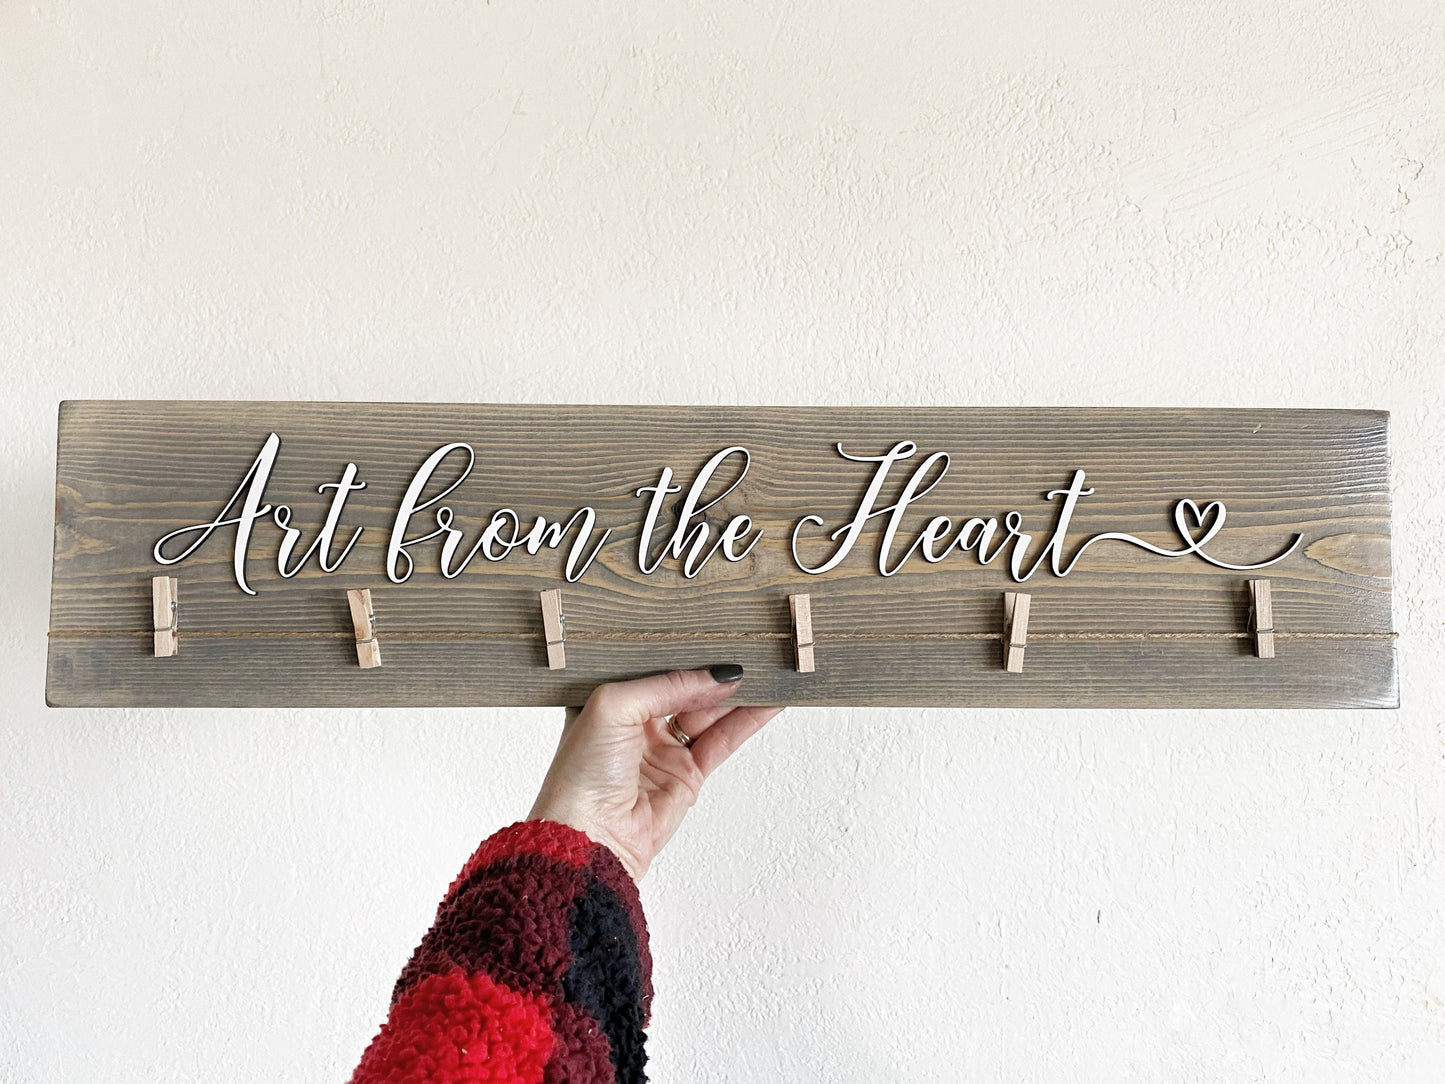 Art from the Heart Artwork Display Board, Personalized Clips Kids Name, School Work Display Sign, Look What We Made, Vinyl or 3D Lettering